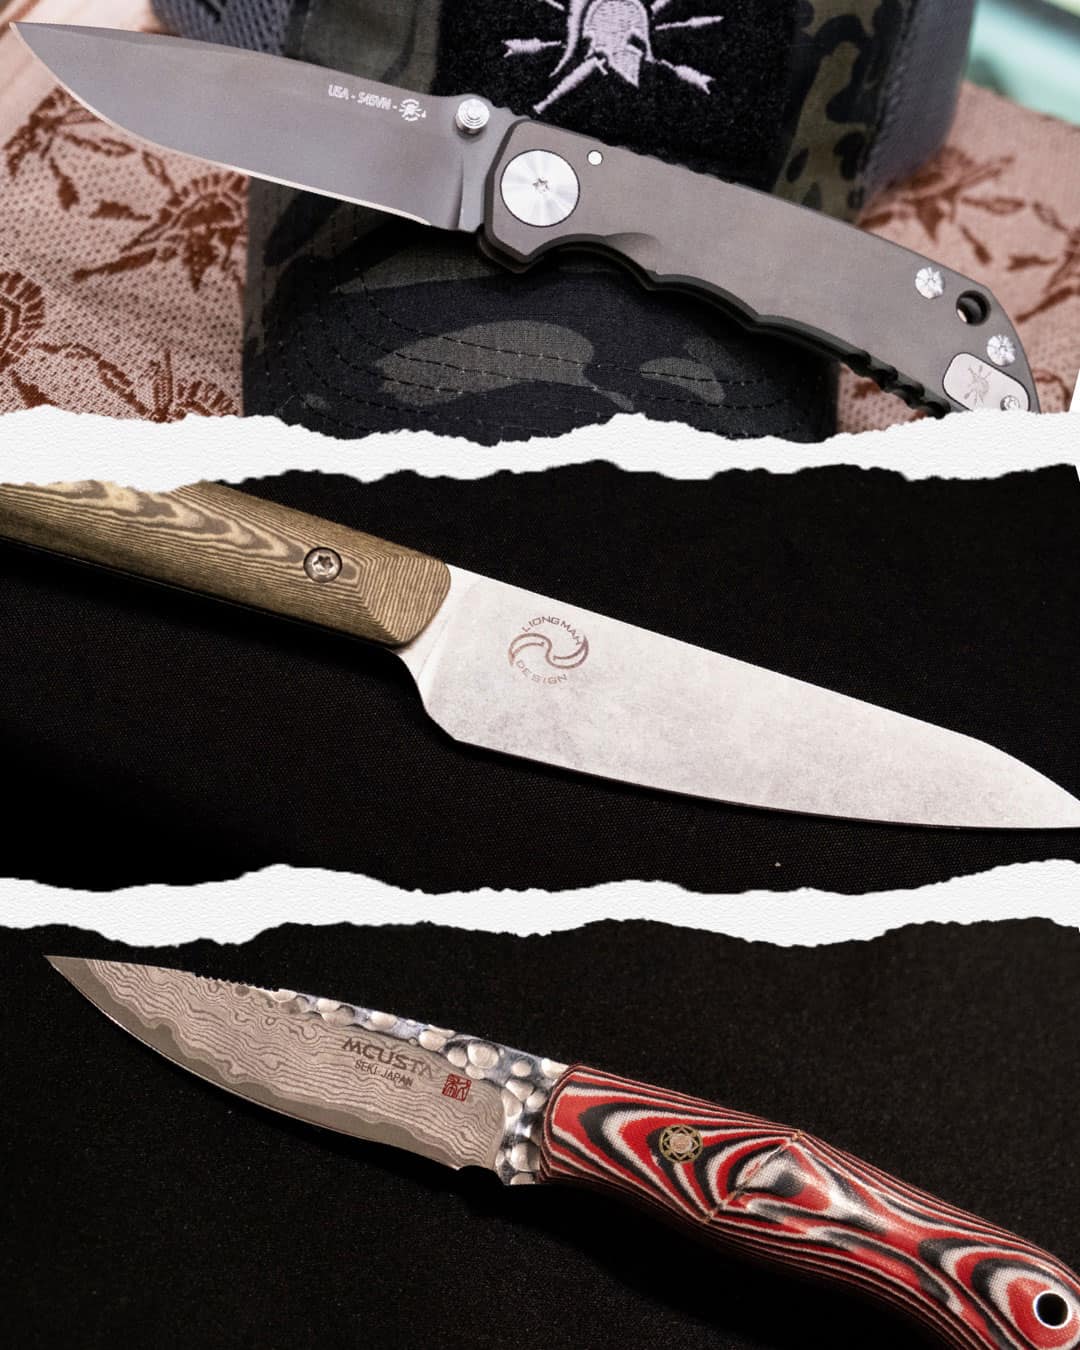 There were a lot of great knife releases we discovered on the last say of SHOT Show 2023. We cover it all in this article.